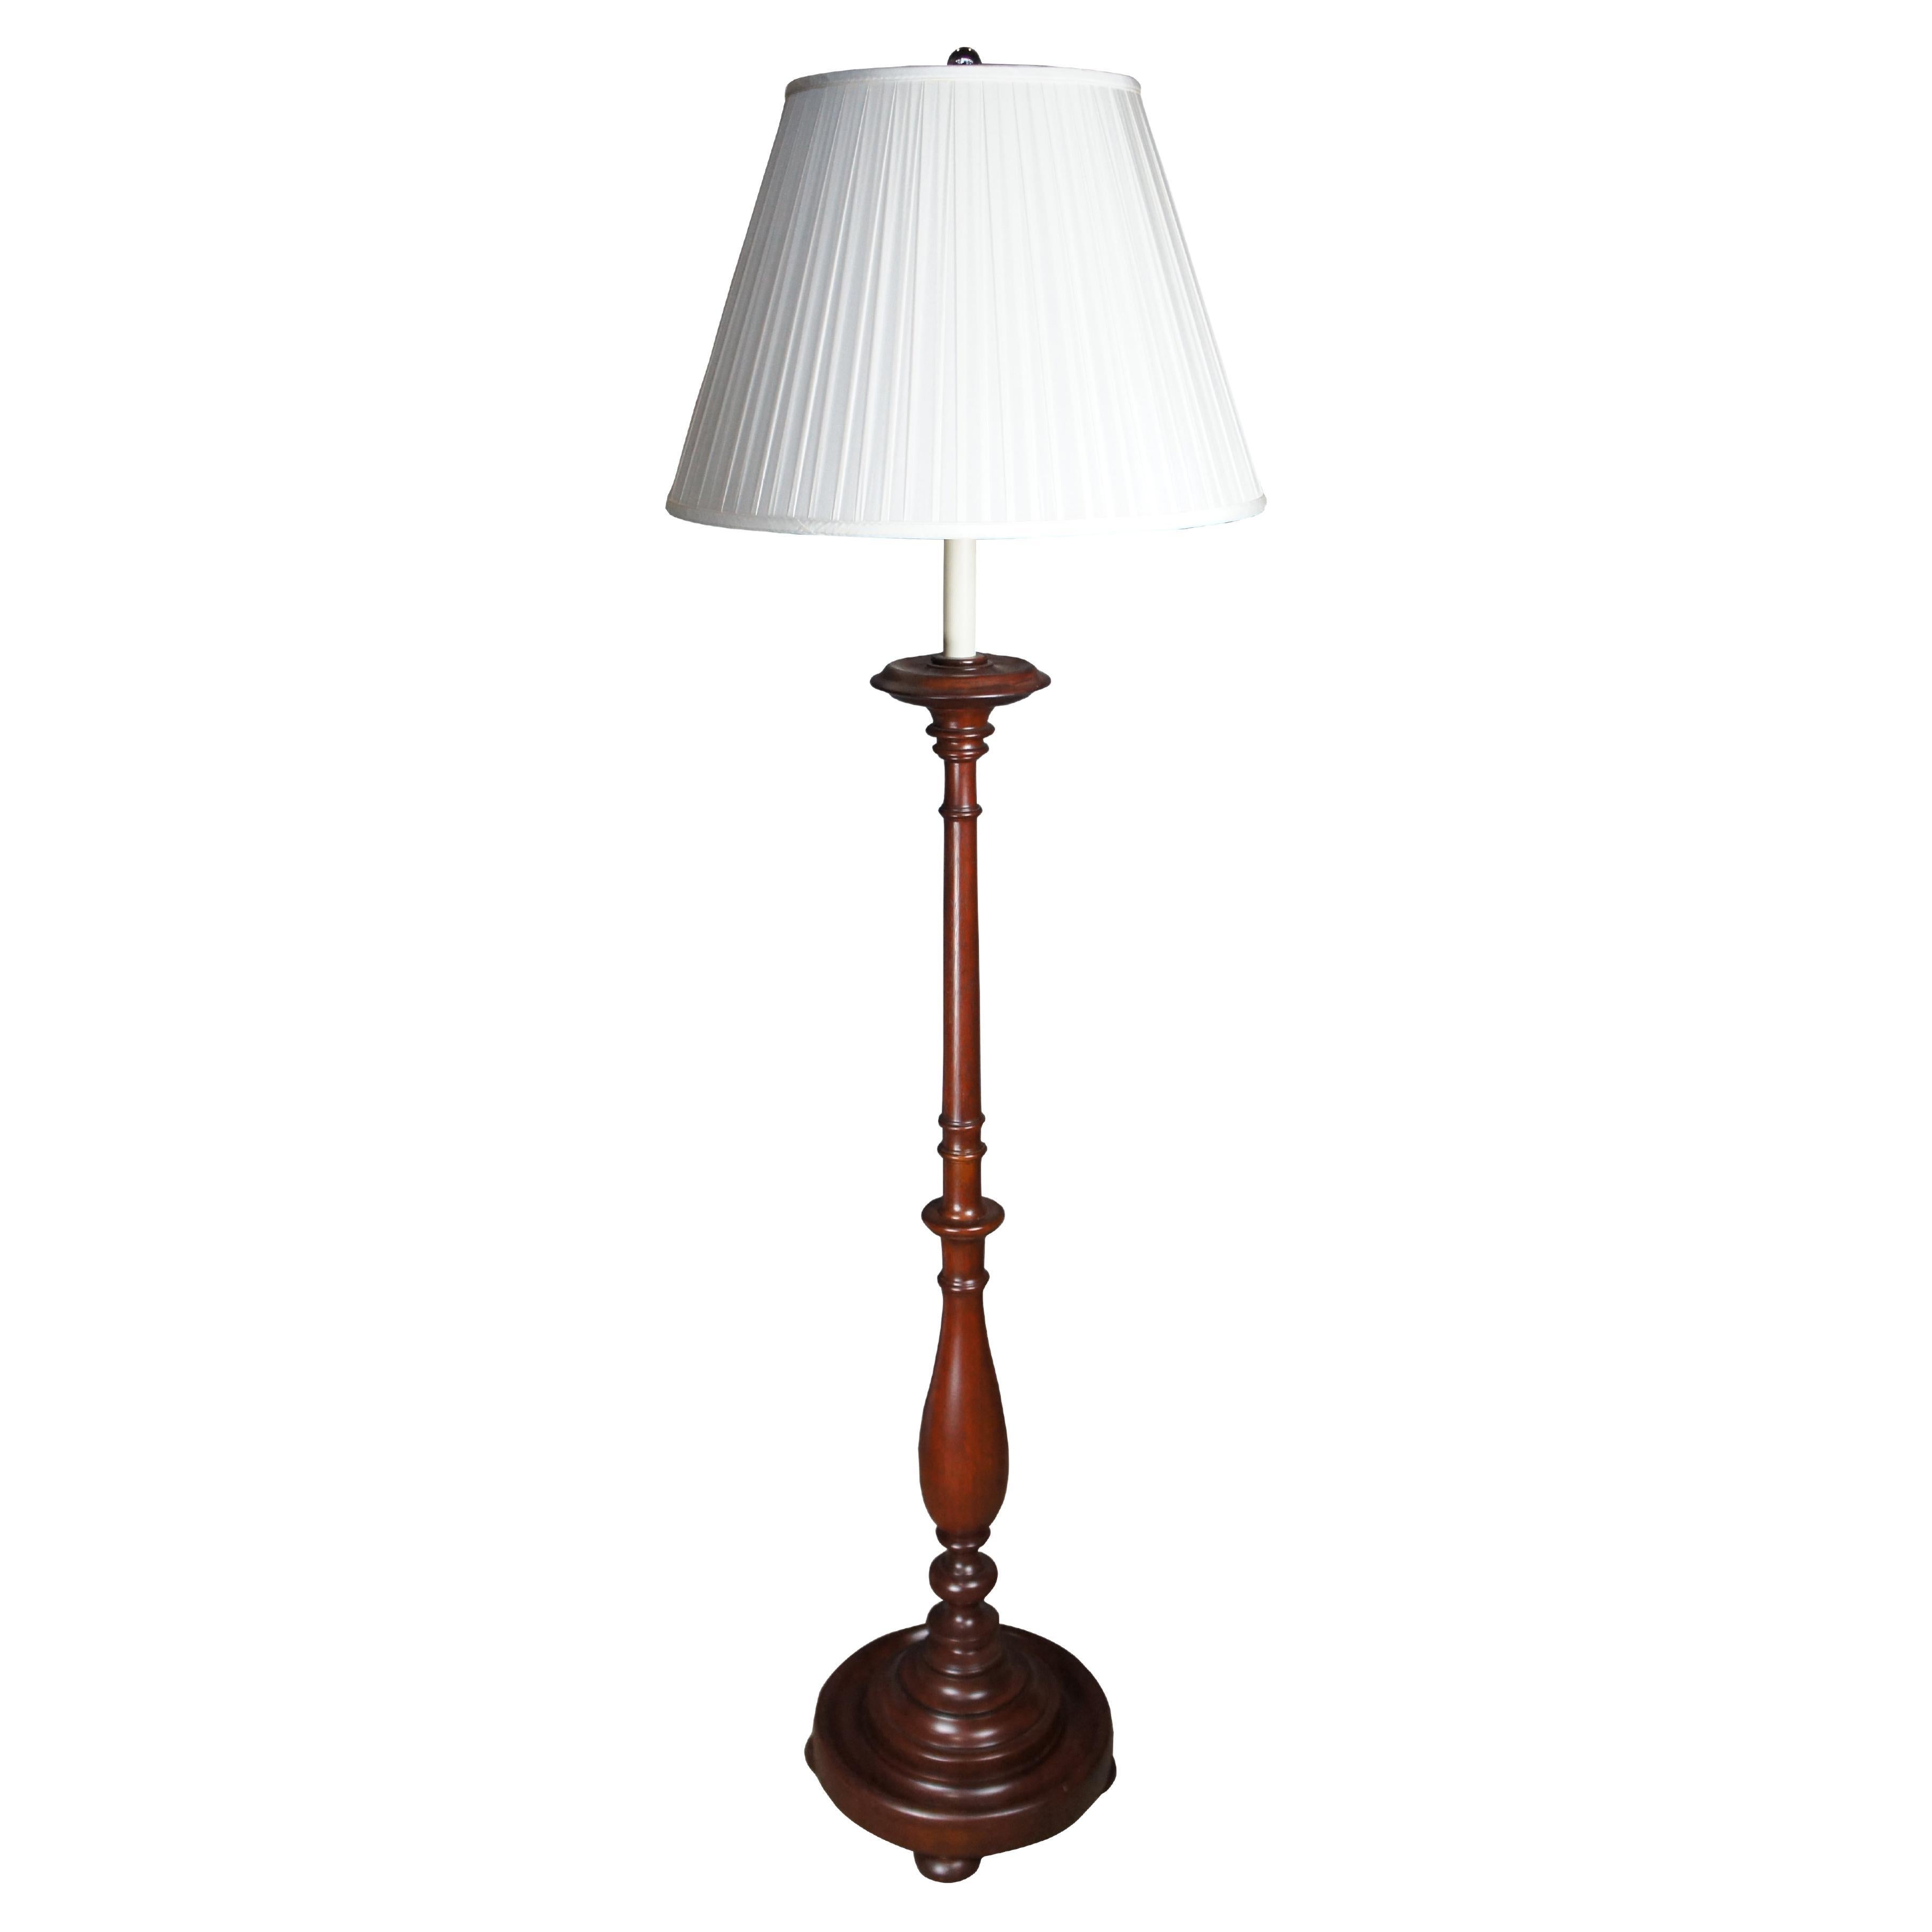 Ralph Lauren Traditional Mahogany Candle Stand Floor Lamp Adjustable Height 68" For Sale